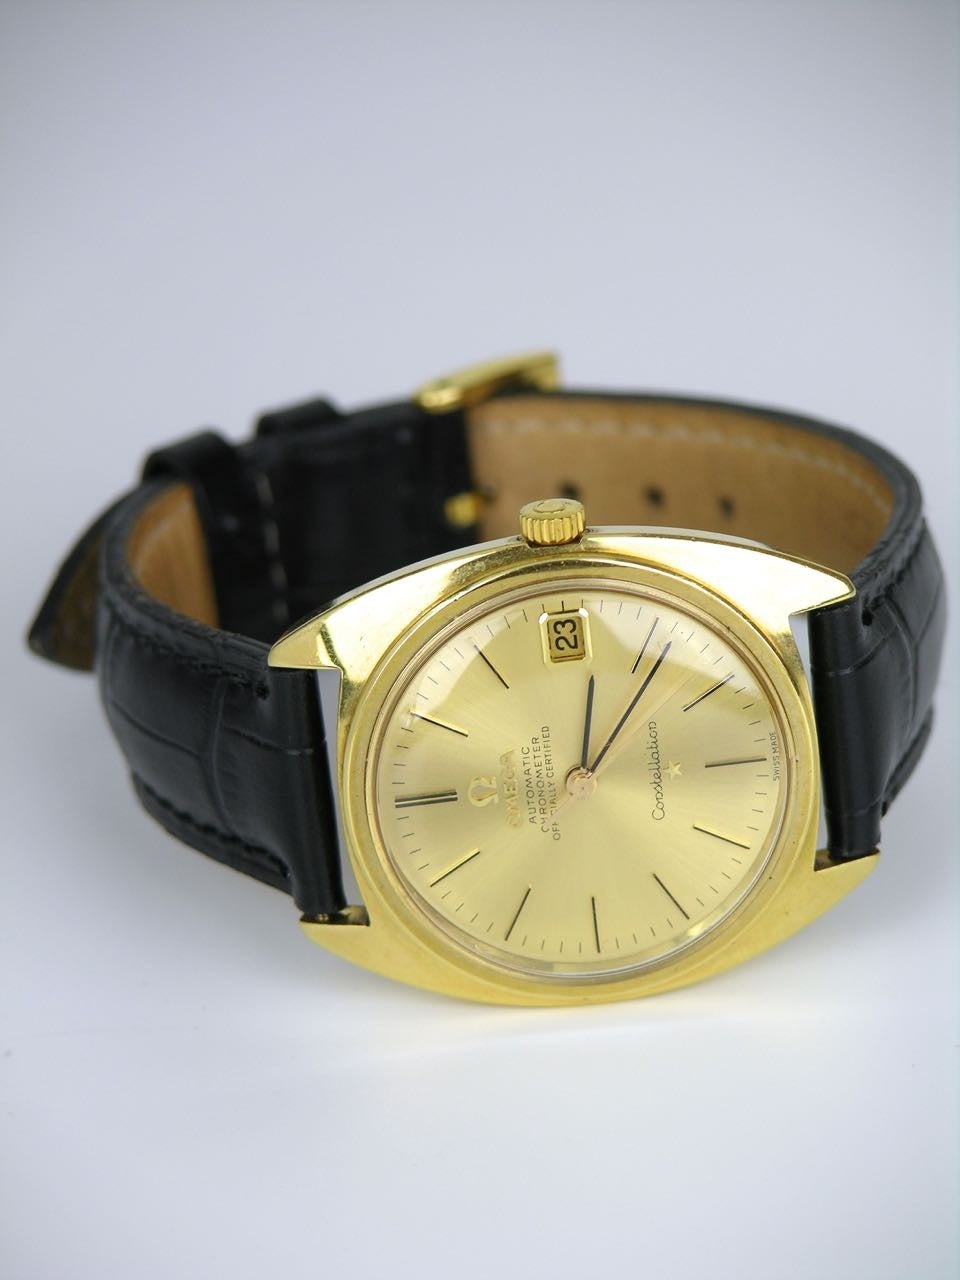 A 18ct gold mens Omega constellation wristwatch

- solid 18k yellow gold case  
- black leather band with omega rolled gold clasp 
- solid 18k yellow gold face with baton markers 
- 34mm diameter 
- automatic movement 
- calibre 564 
-